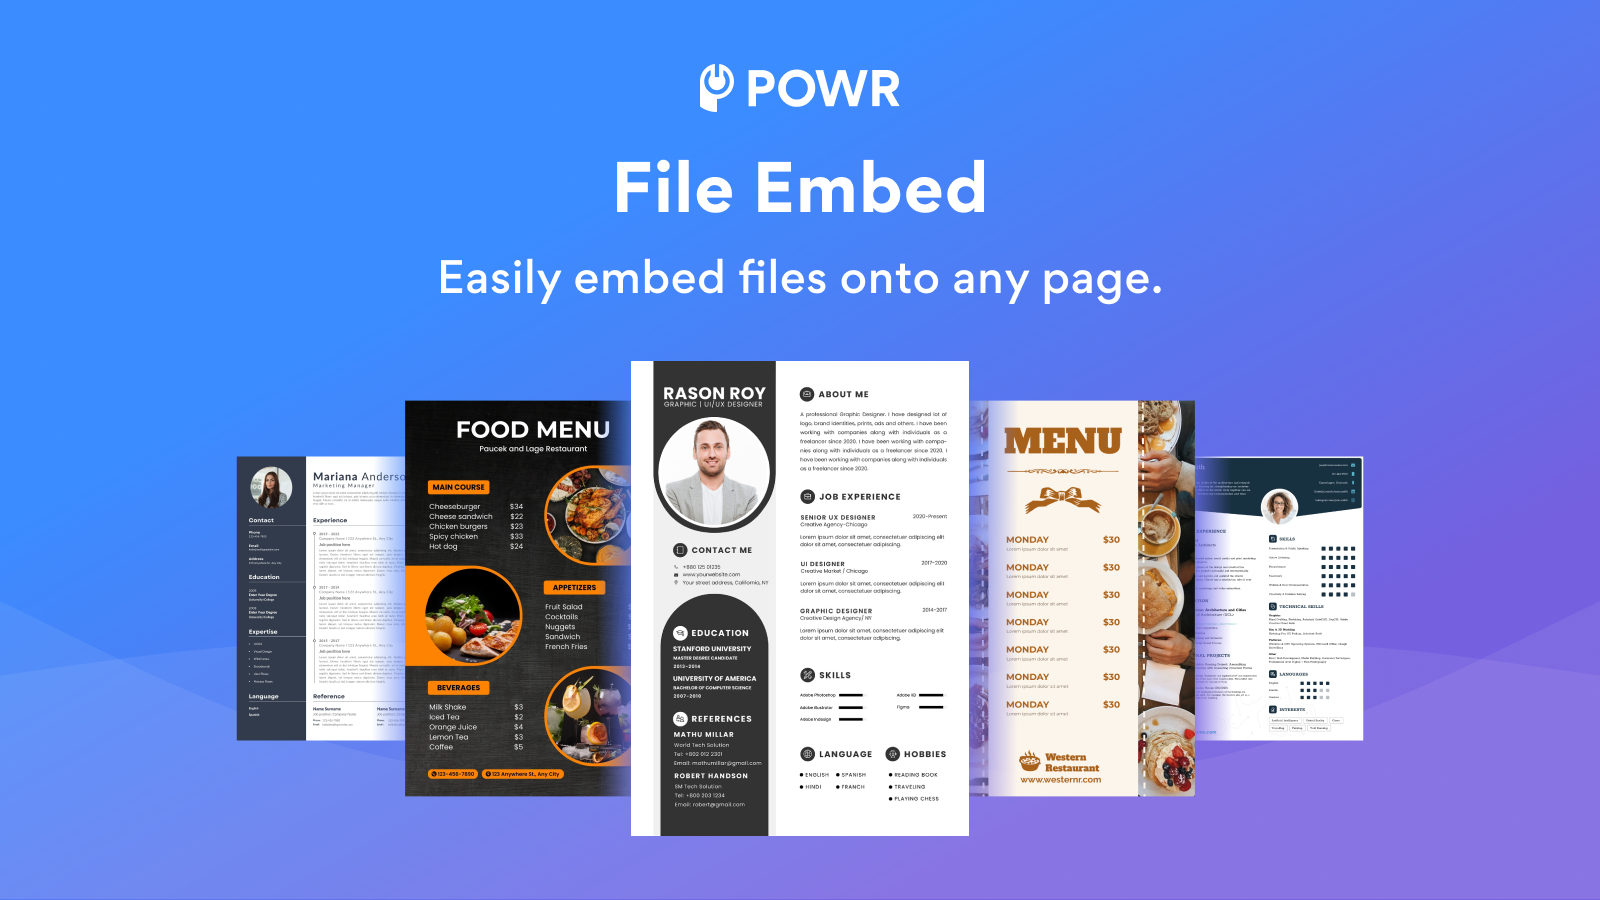 Easily embed files onto any page